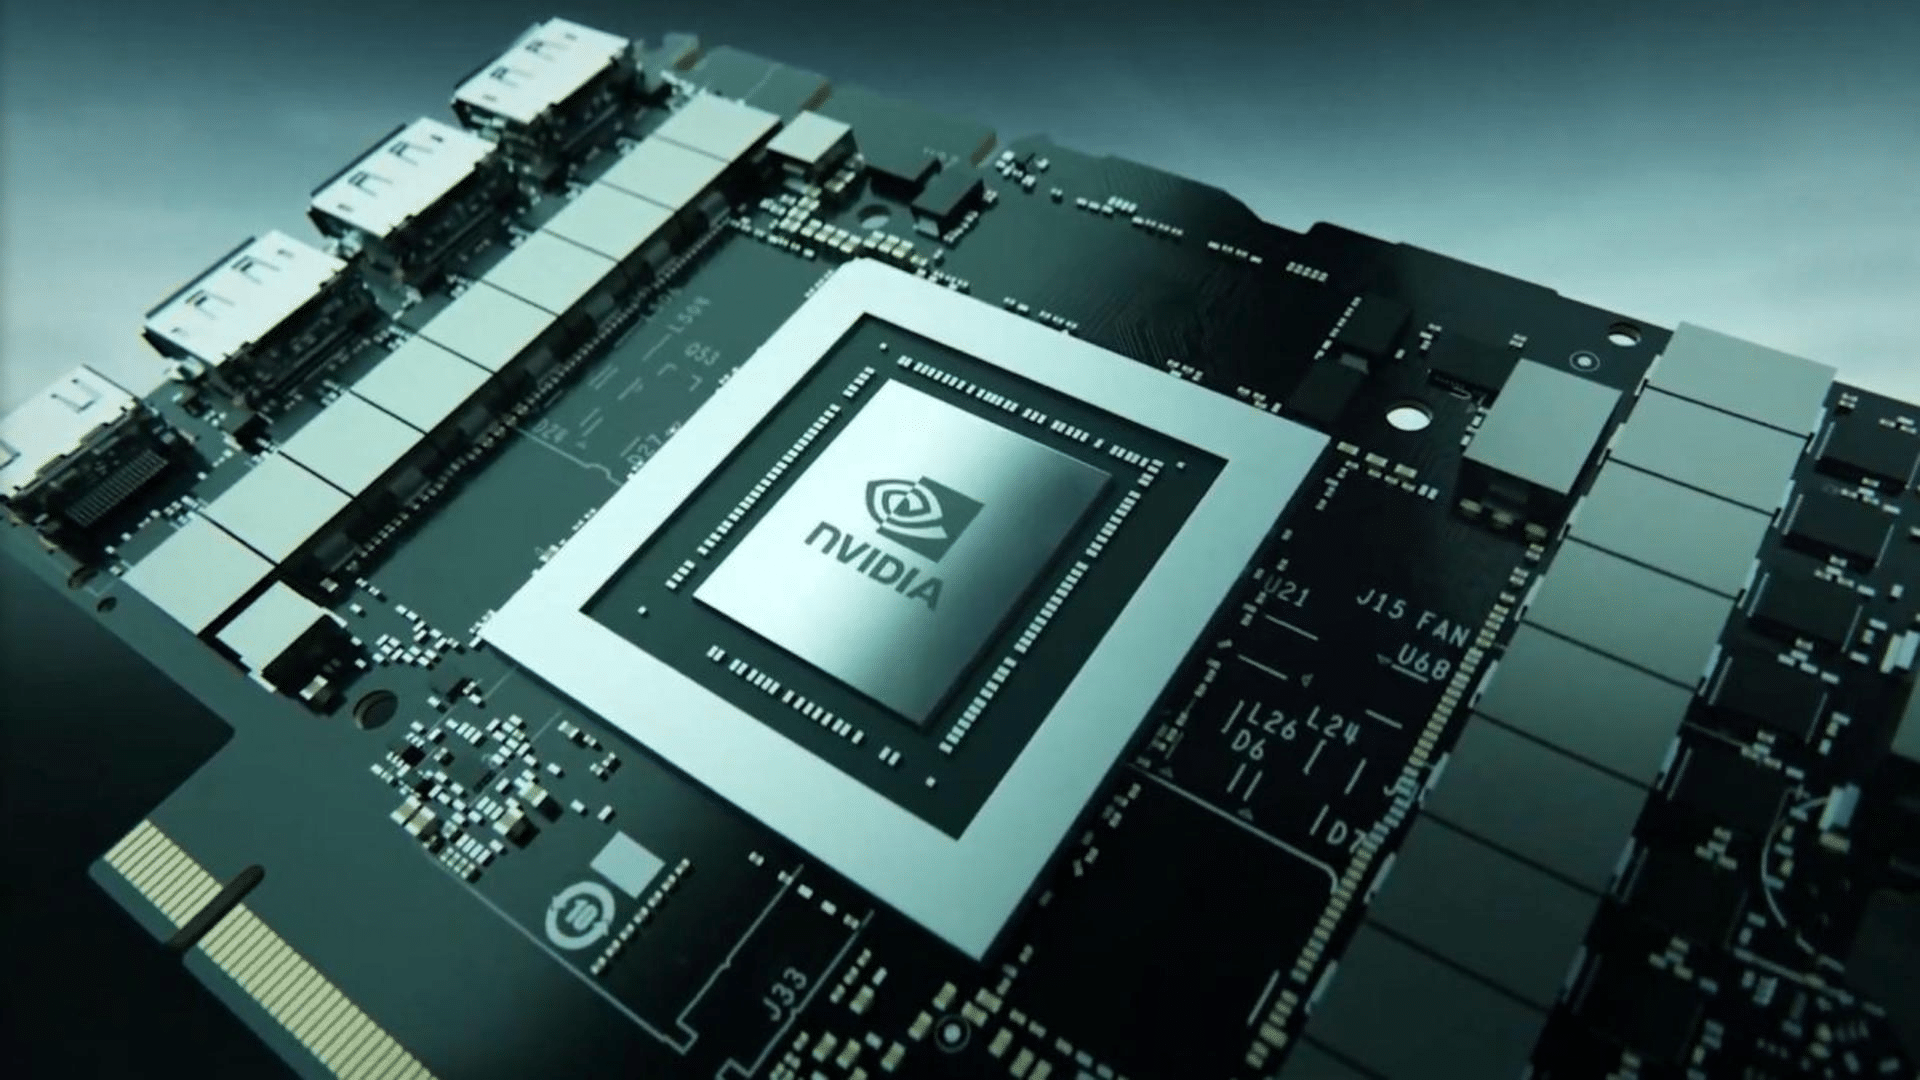 NVIDIA GeForce RTX 3060 mobile video card performed well in Ethereum mining